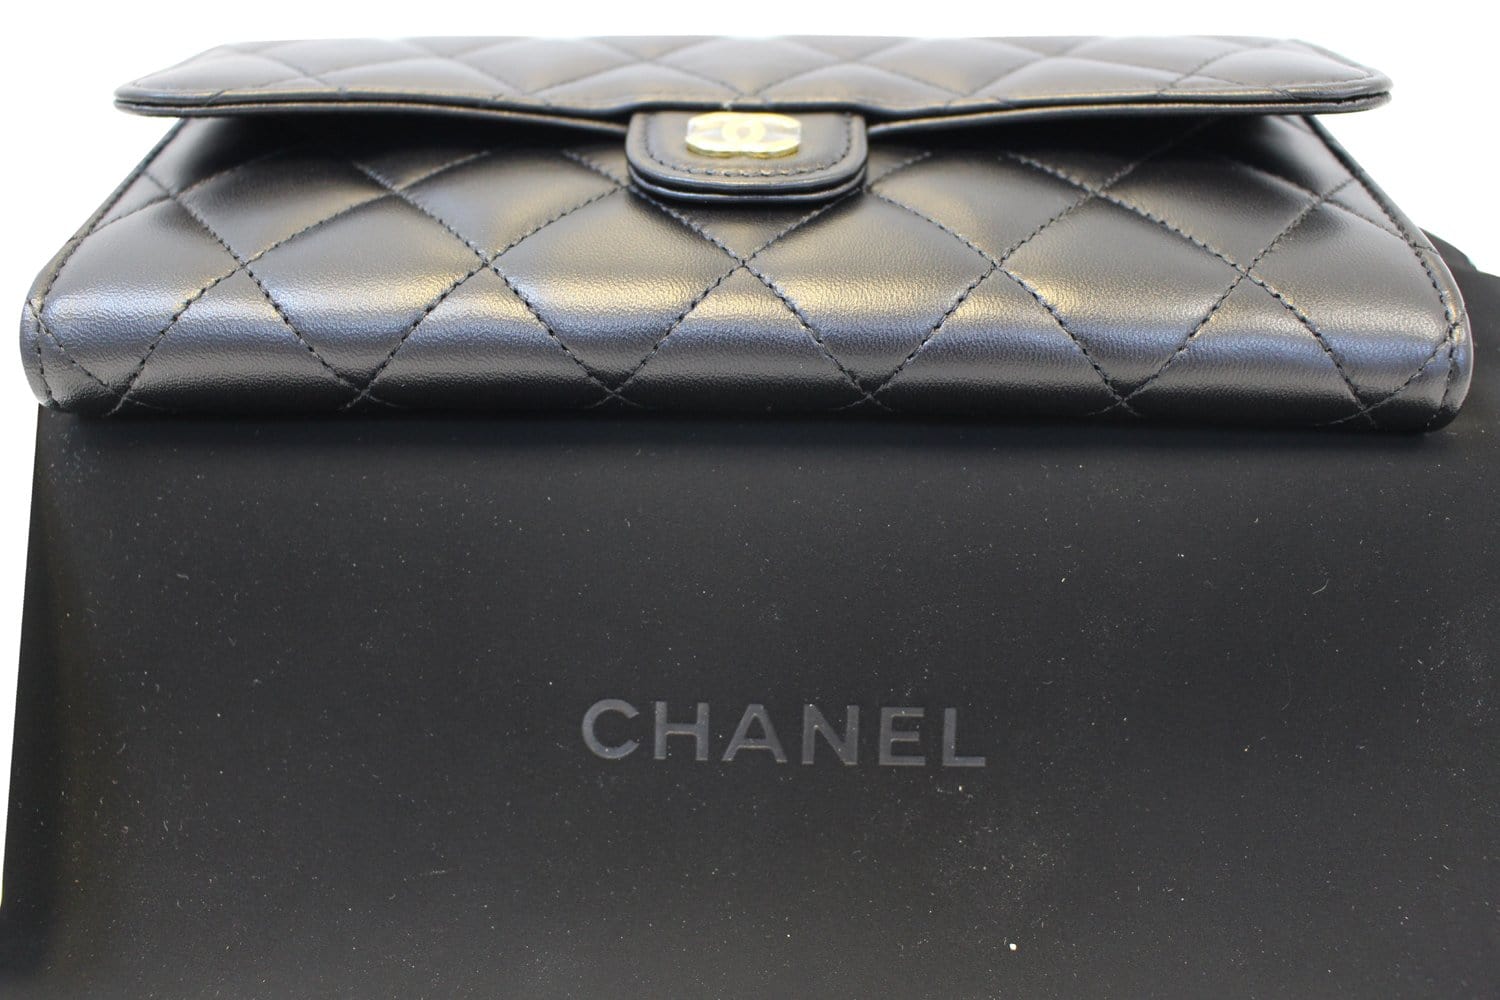 Chanel Classic Long Wallet in Quilted Lambskin Leather, Bi-Fold